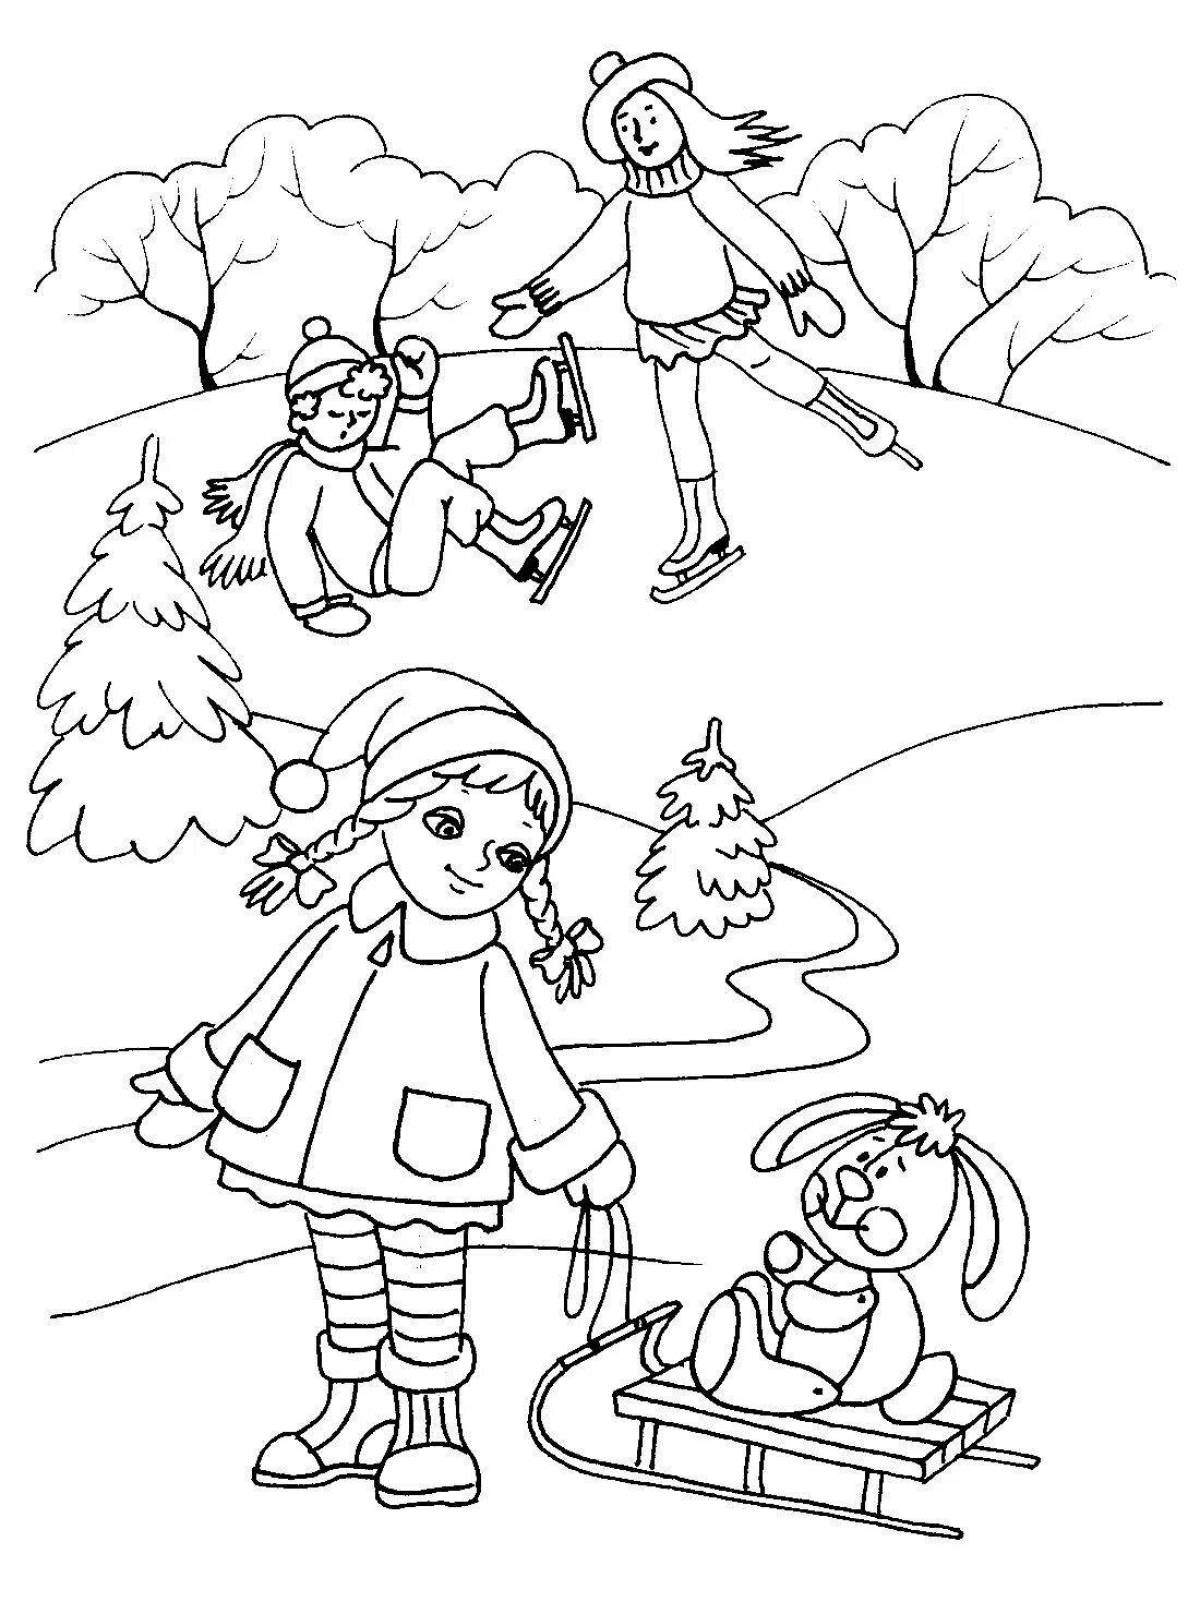 Relaxing walk through the coloring page